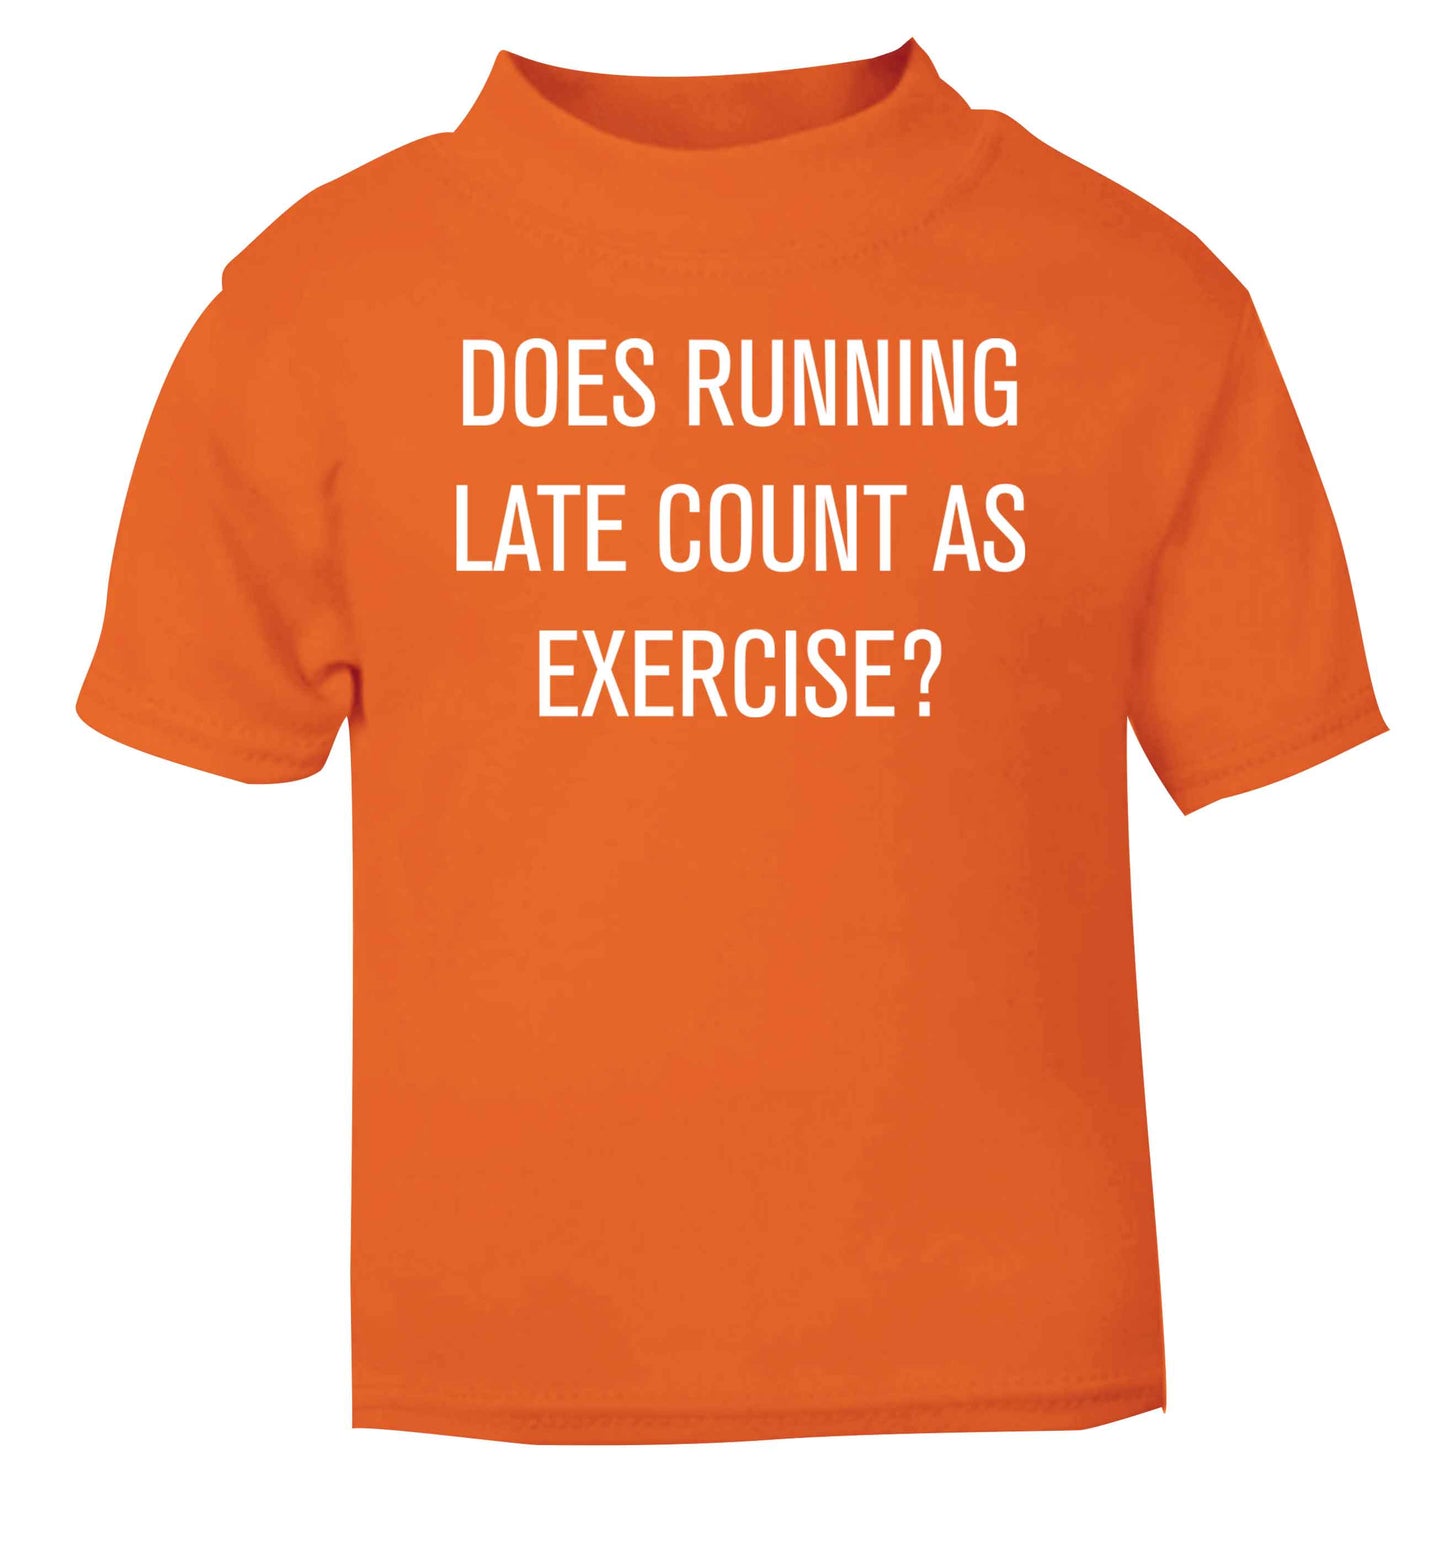 Does running late count as exercise? orange baby toddler Tshirt 2 Years